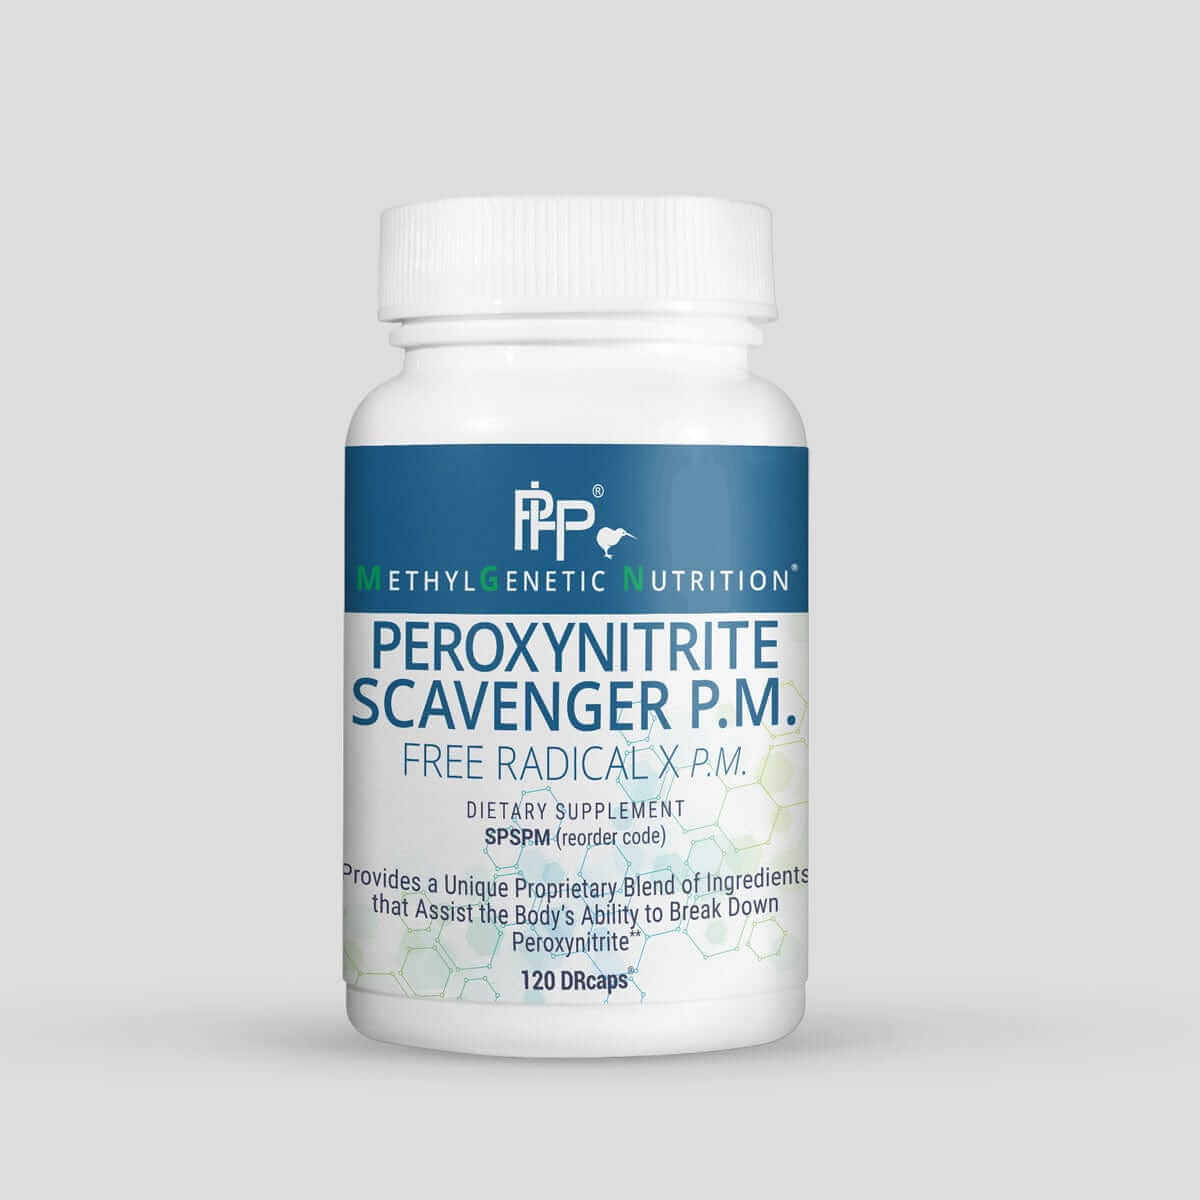 Peroxynitrite Scavenger PM (Free Radical X P.M.) * Prof Health Products Supplement - Conners Clinic